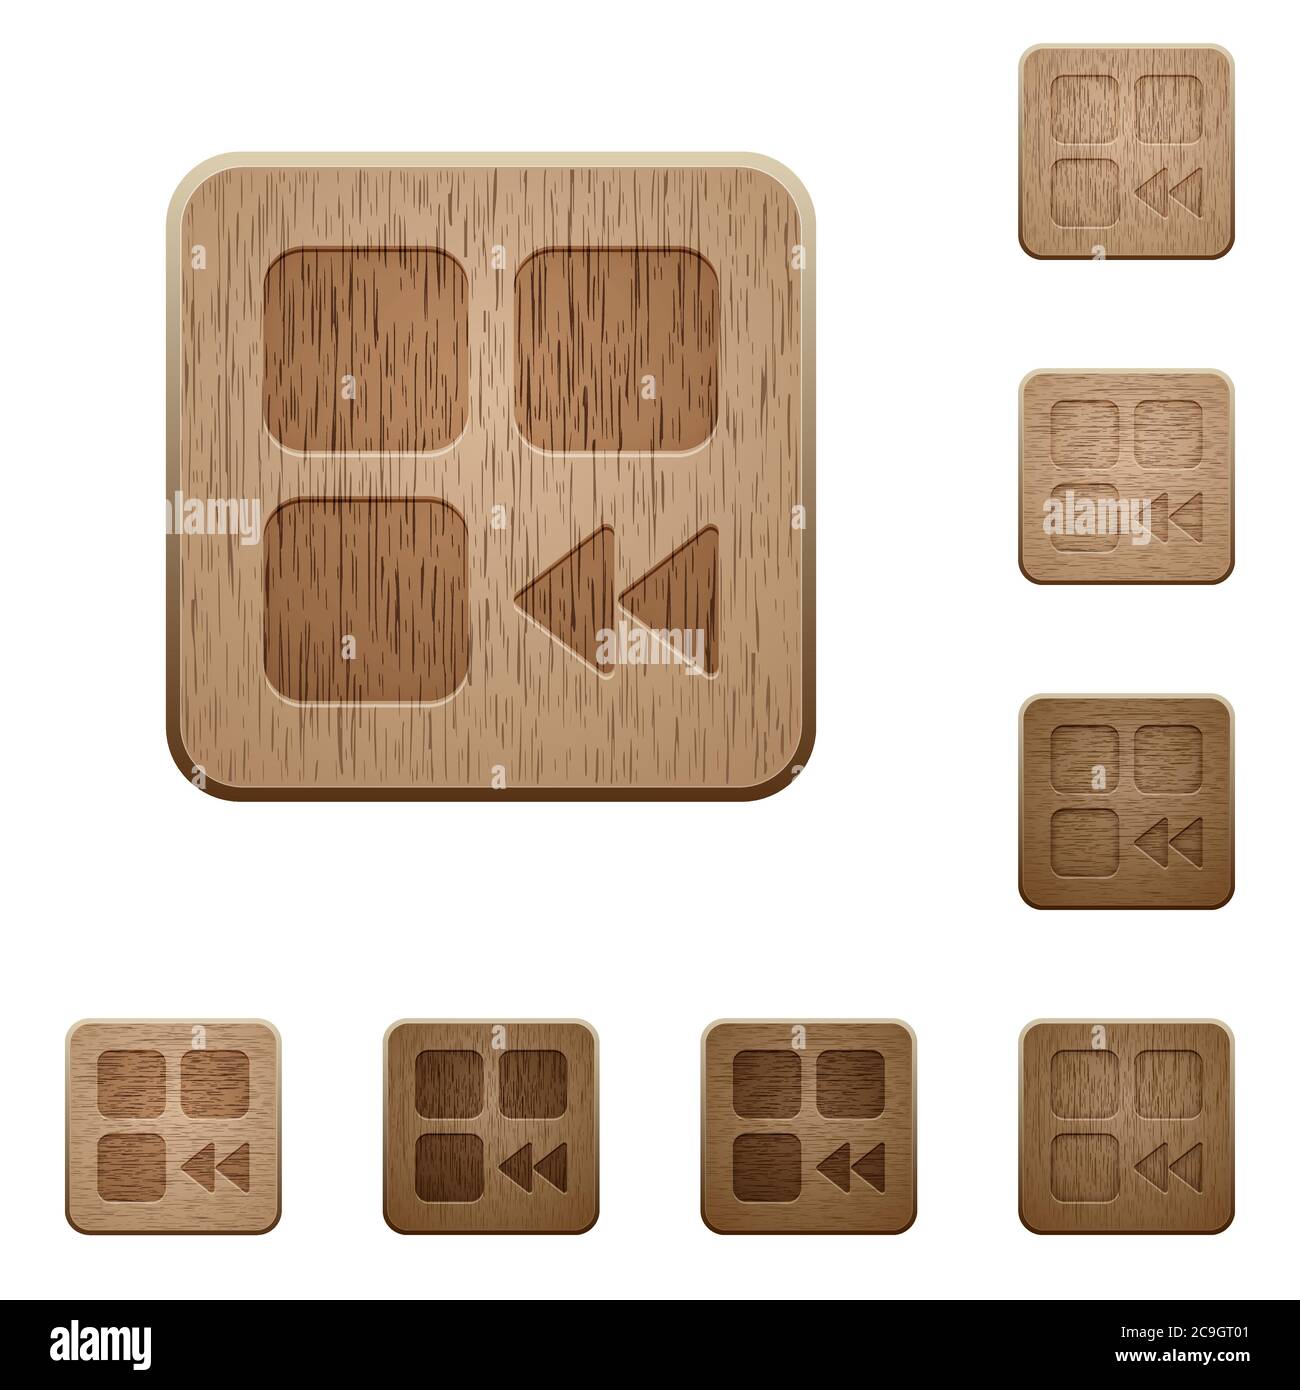 Component fast backward on rounded square carved wooden button styles Stock Vector